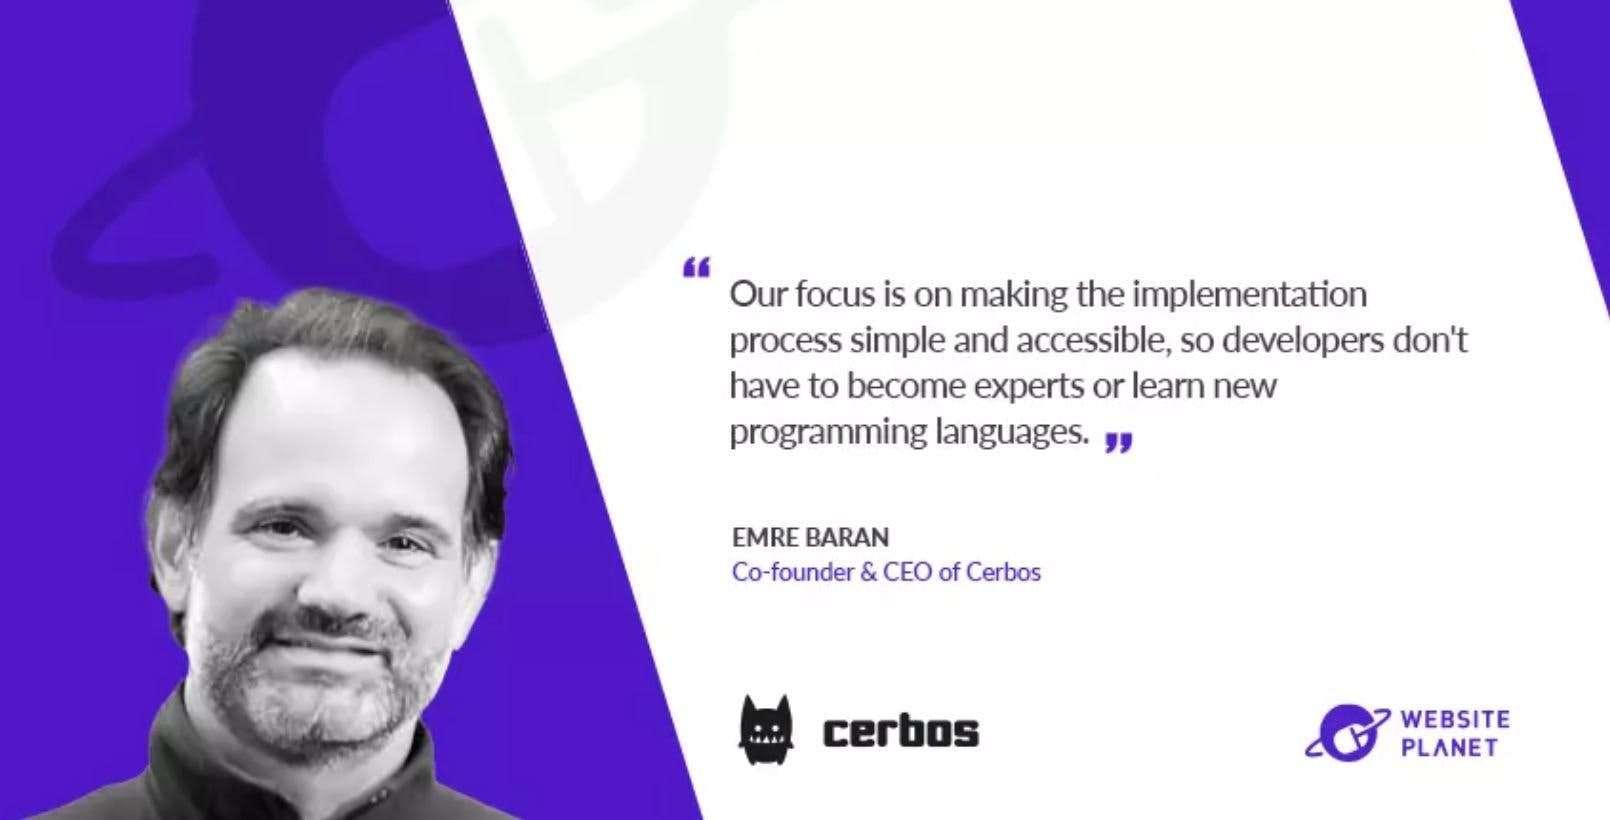 Website Planet: How Cerbos helps developers scale authorization faster & cheaply | Q/A with Emre Baran